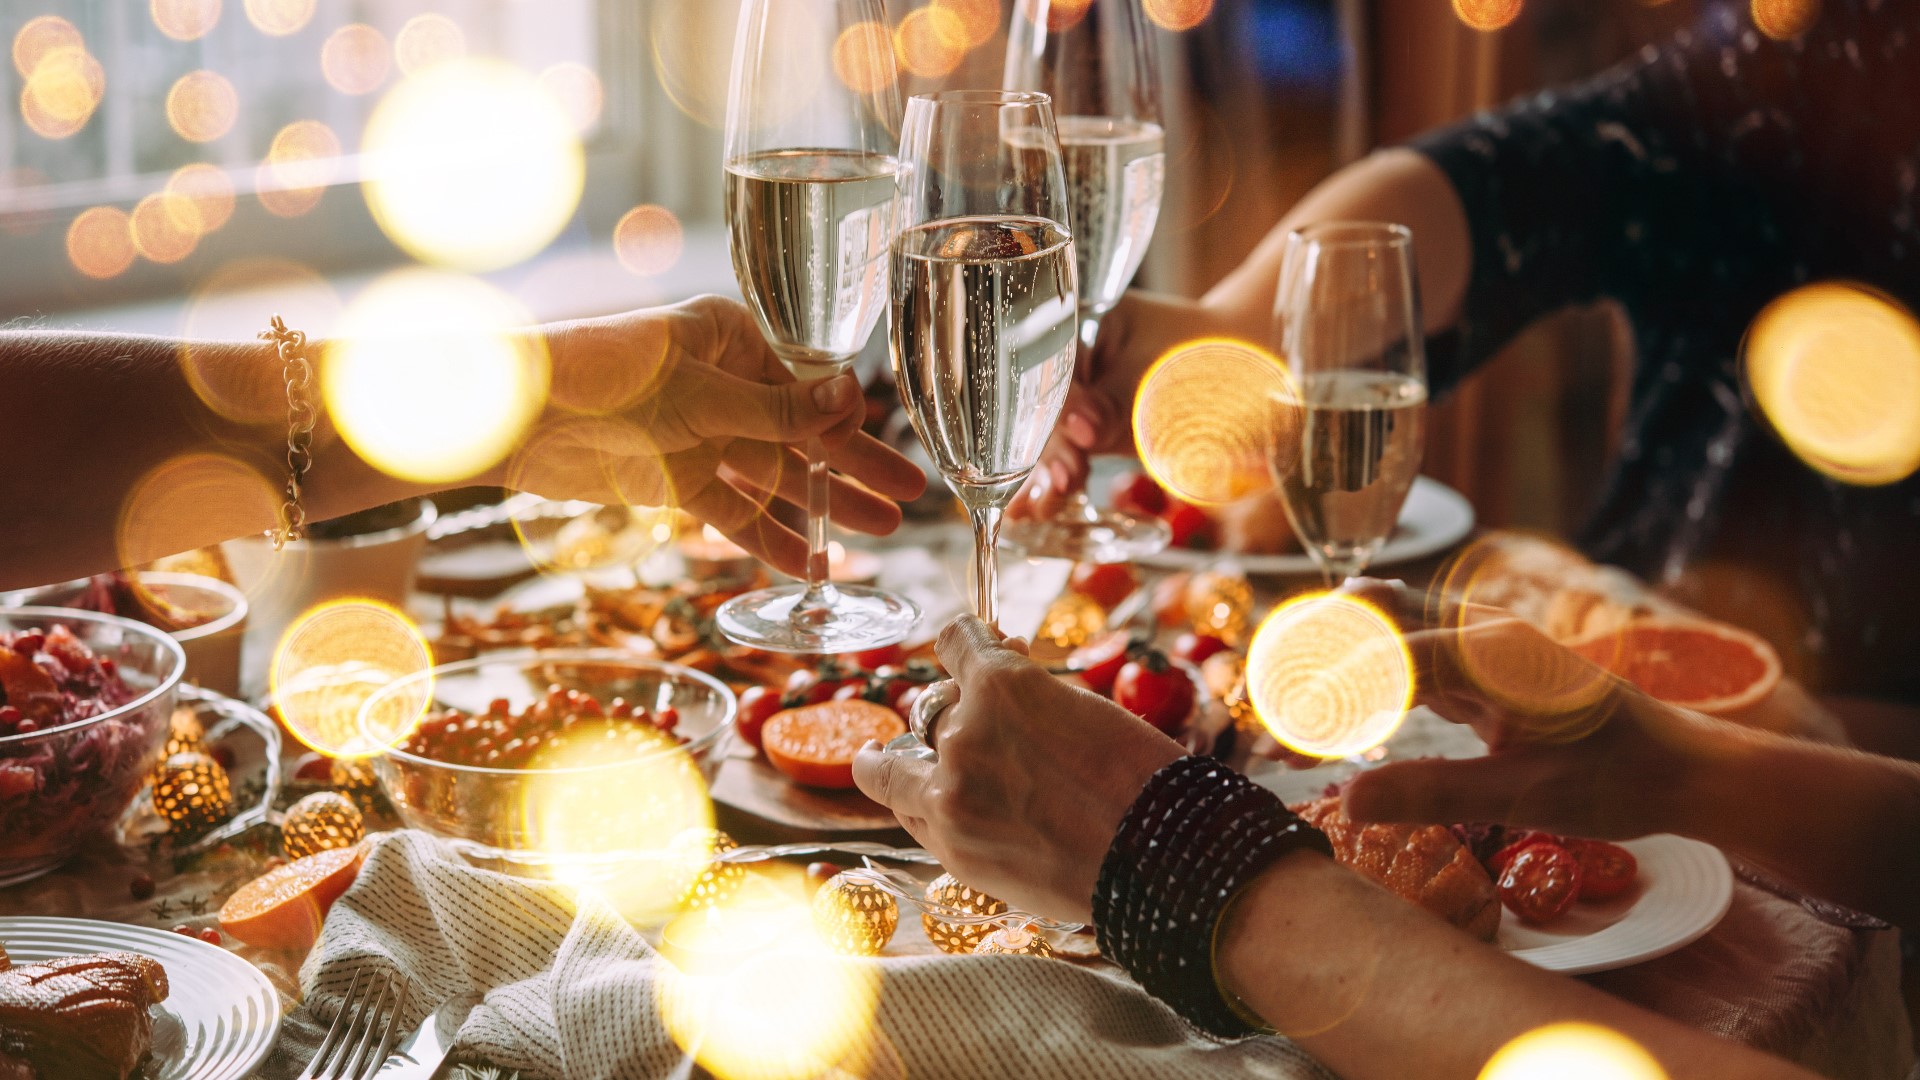 Regine T. Rousseau, wine expert and founder of Shall We Wine shares some delicious wines and spirits for your New Year's toast.